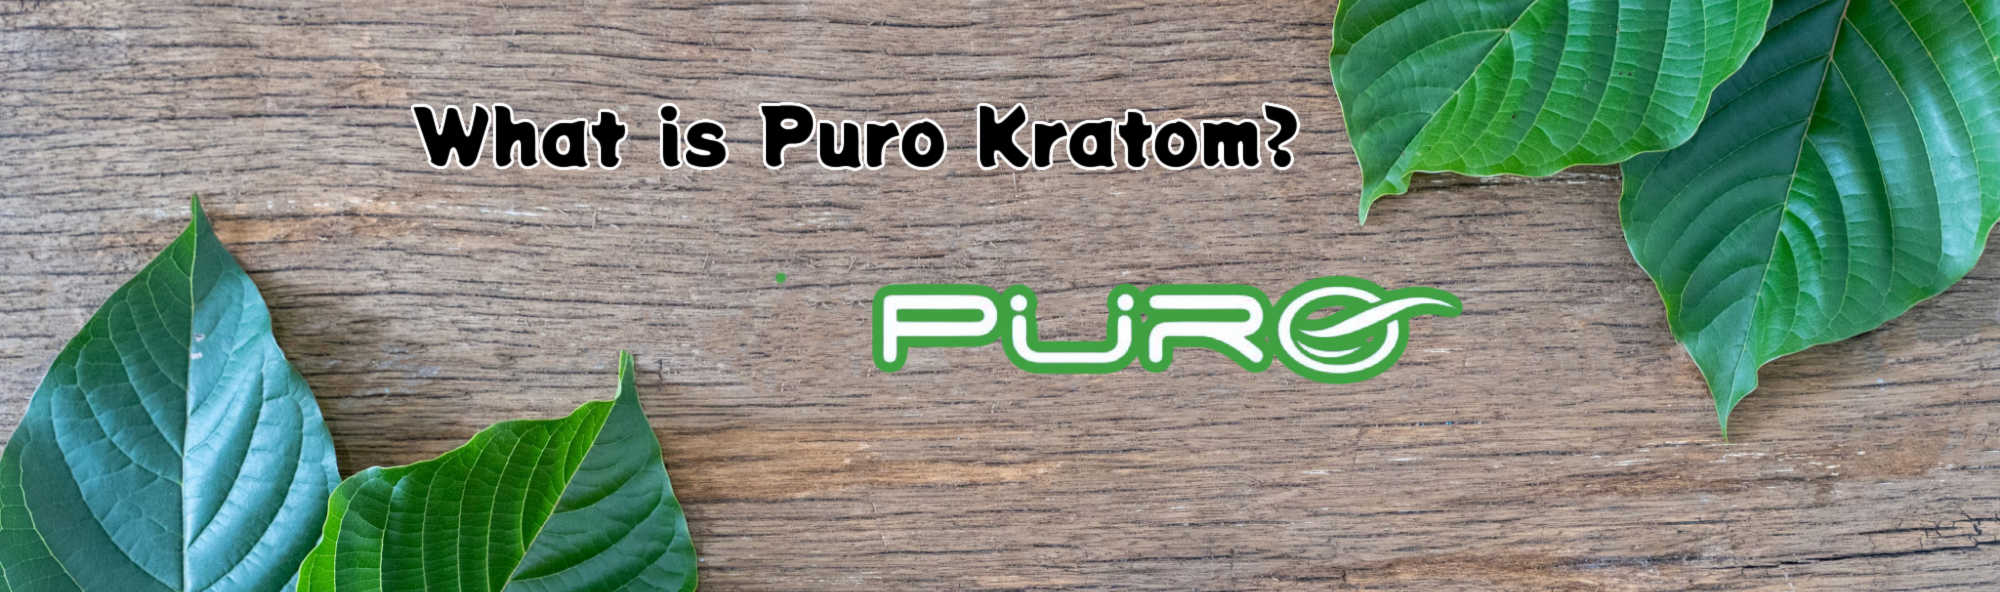 image of what is puro kratom